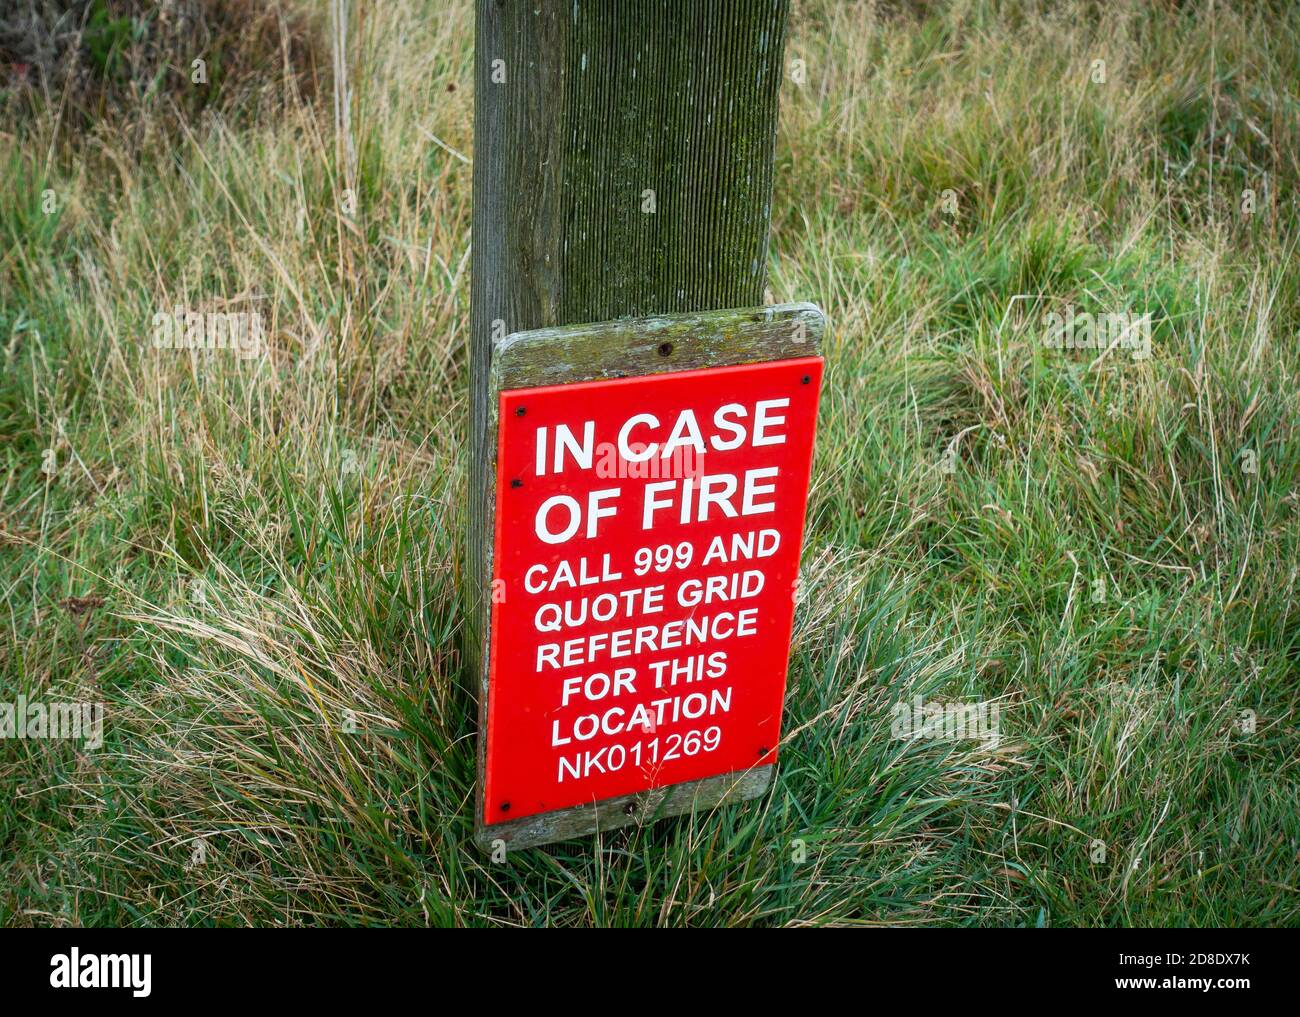 Countryside fire location sign in Scotland, giving grid reference for location Stock Photo